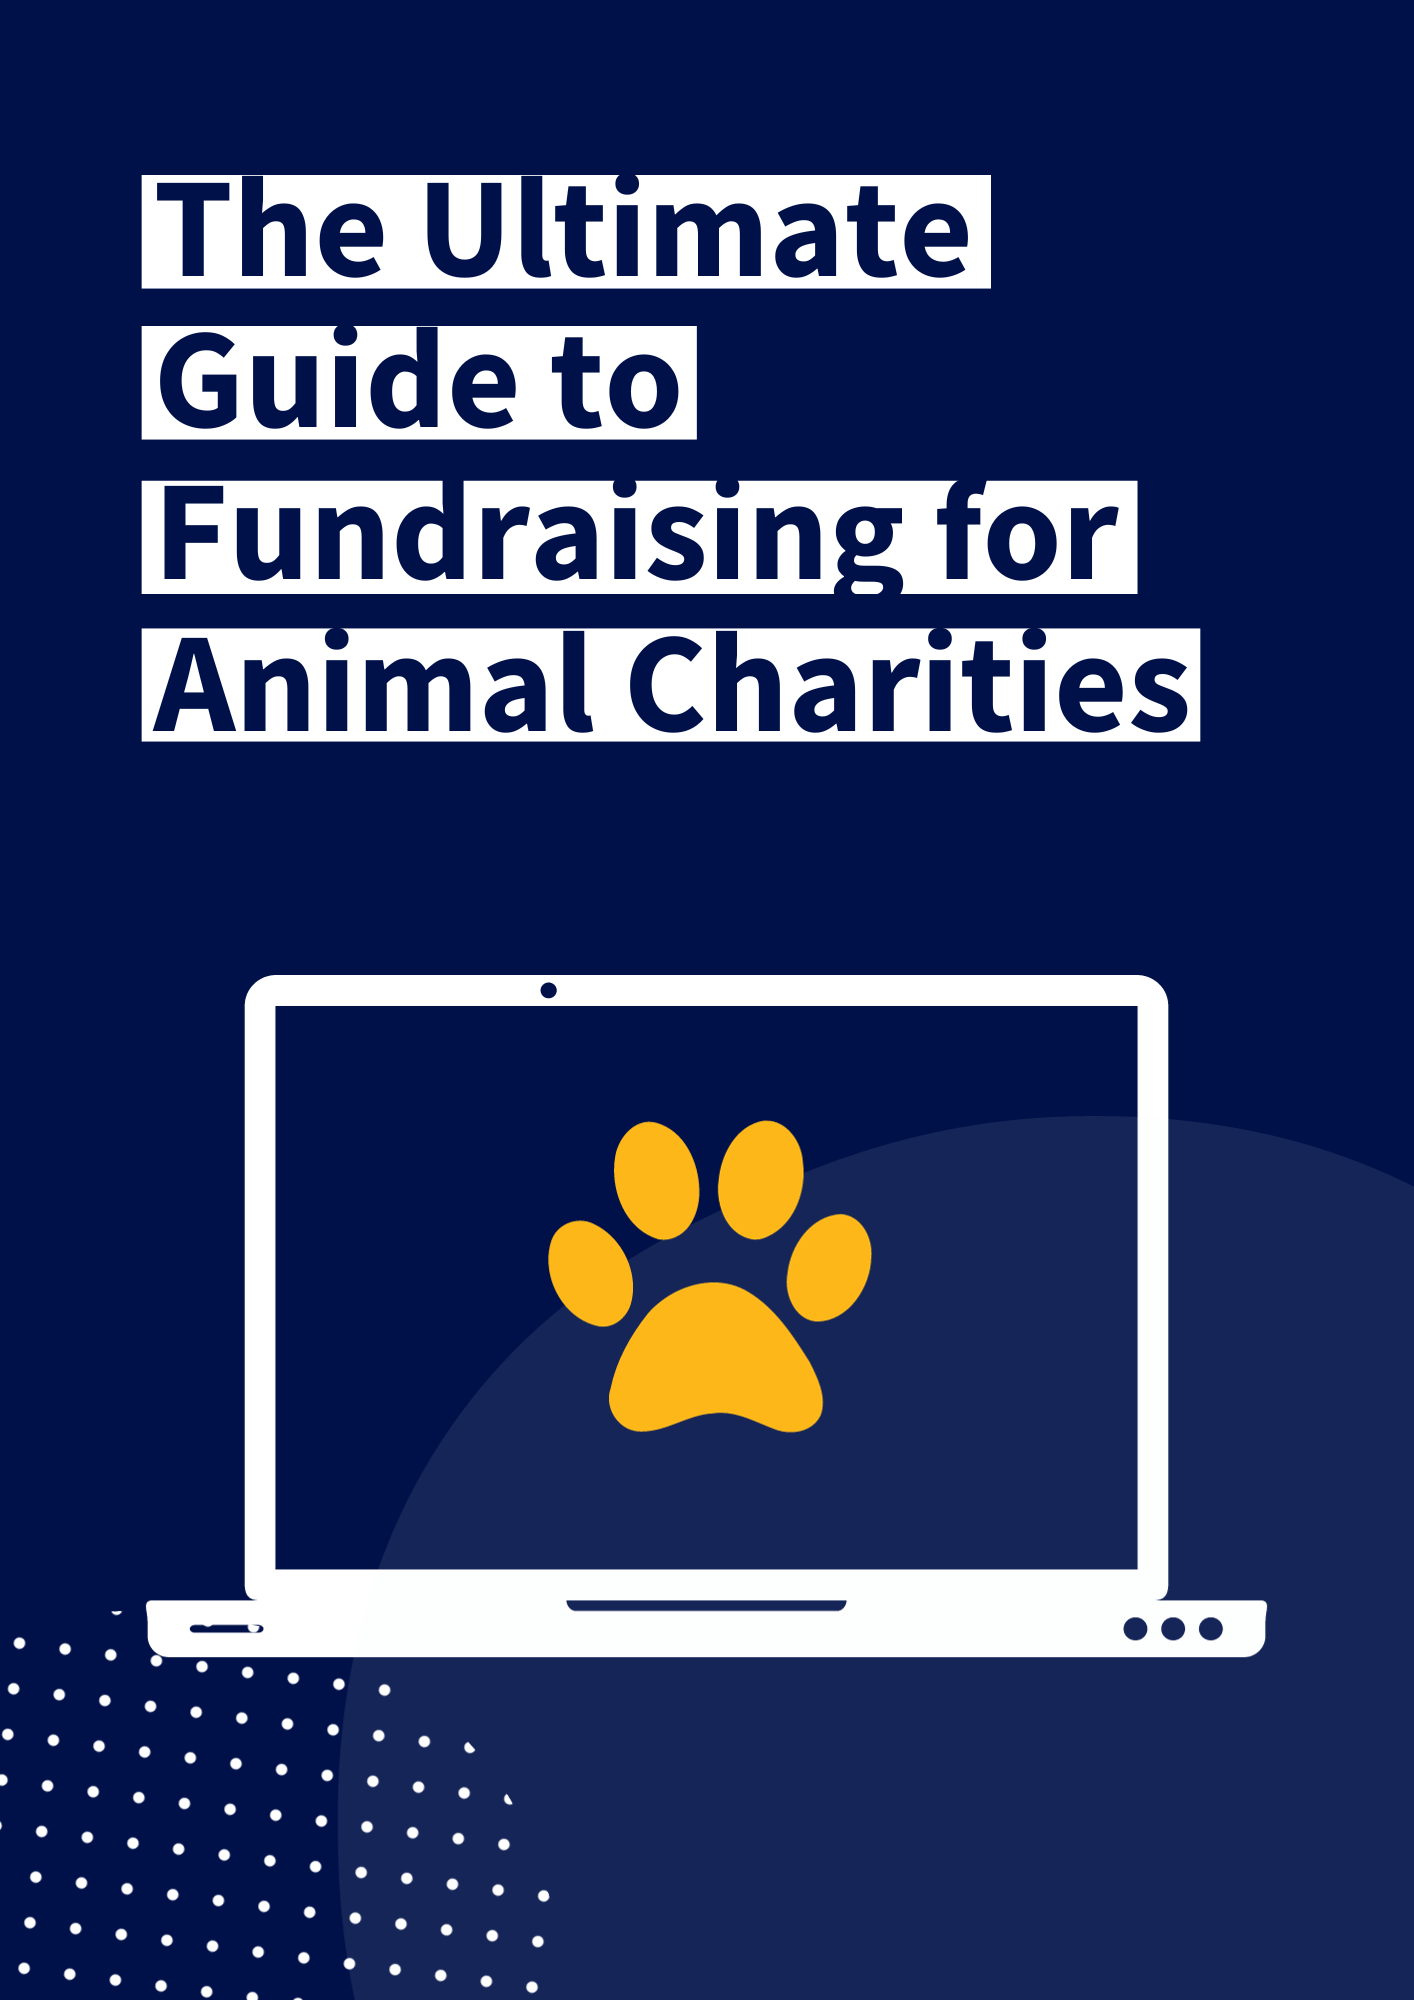 The Ultimate Guide to Fundraising for Animal Charities